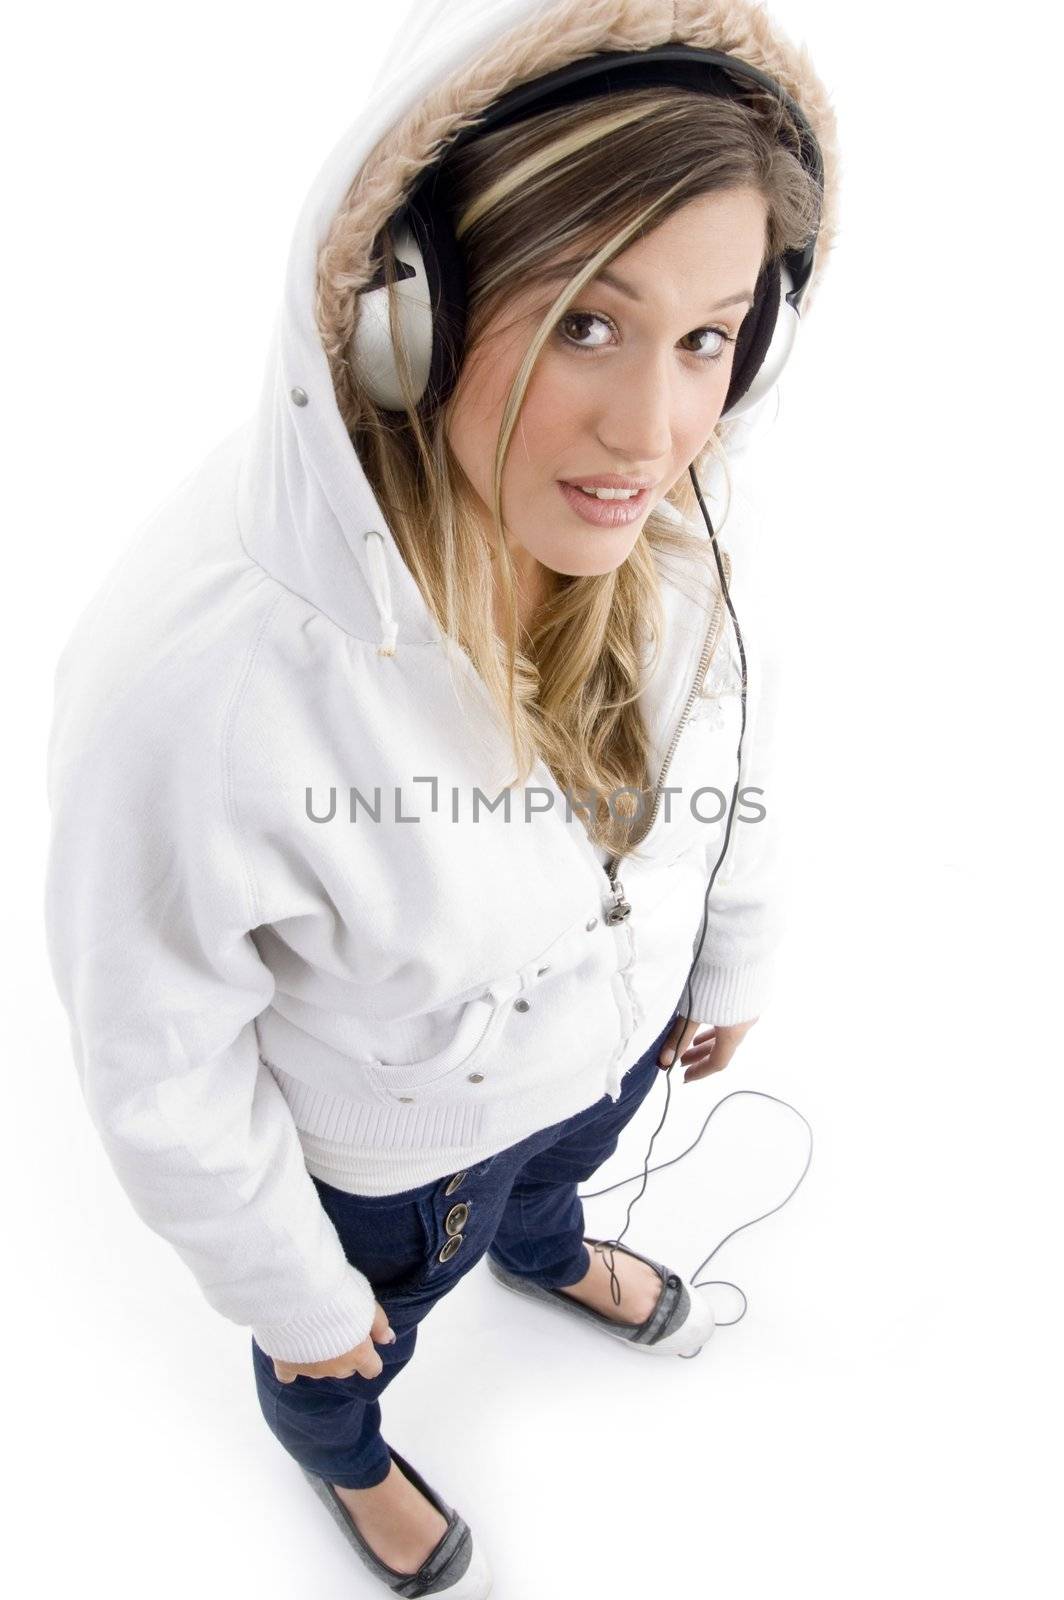 young model listening music with headphones by imagerymajestic